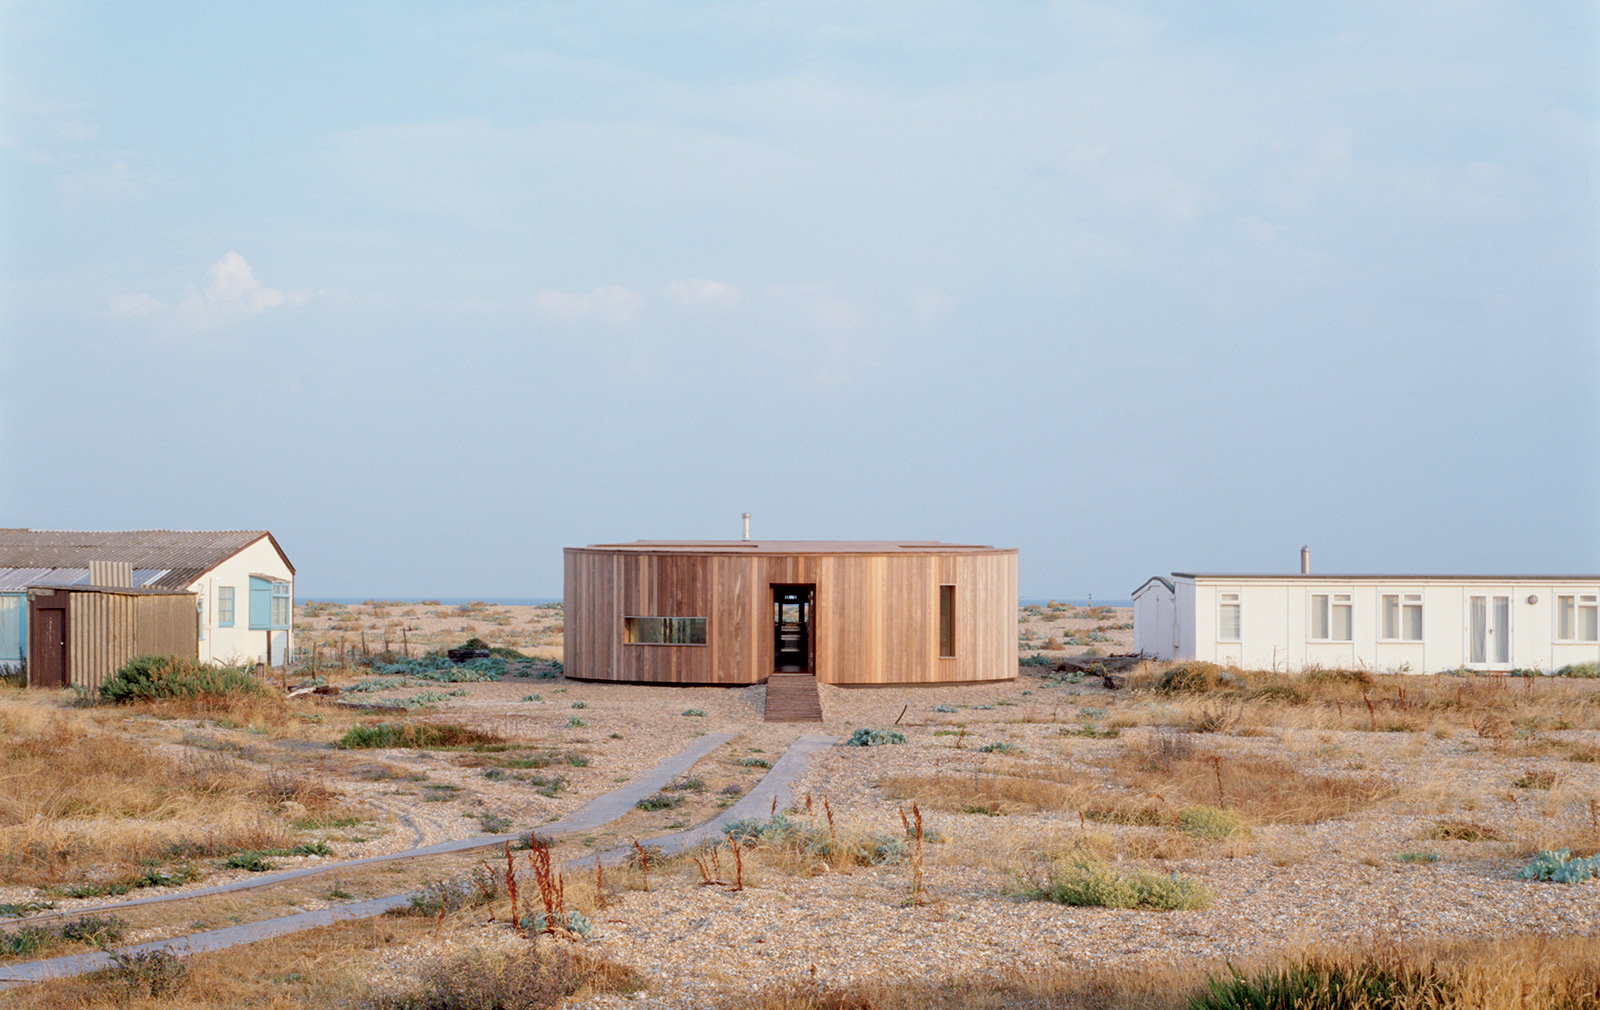 El Ray by Simon Conder in Dungeness